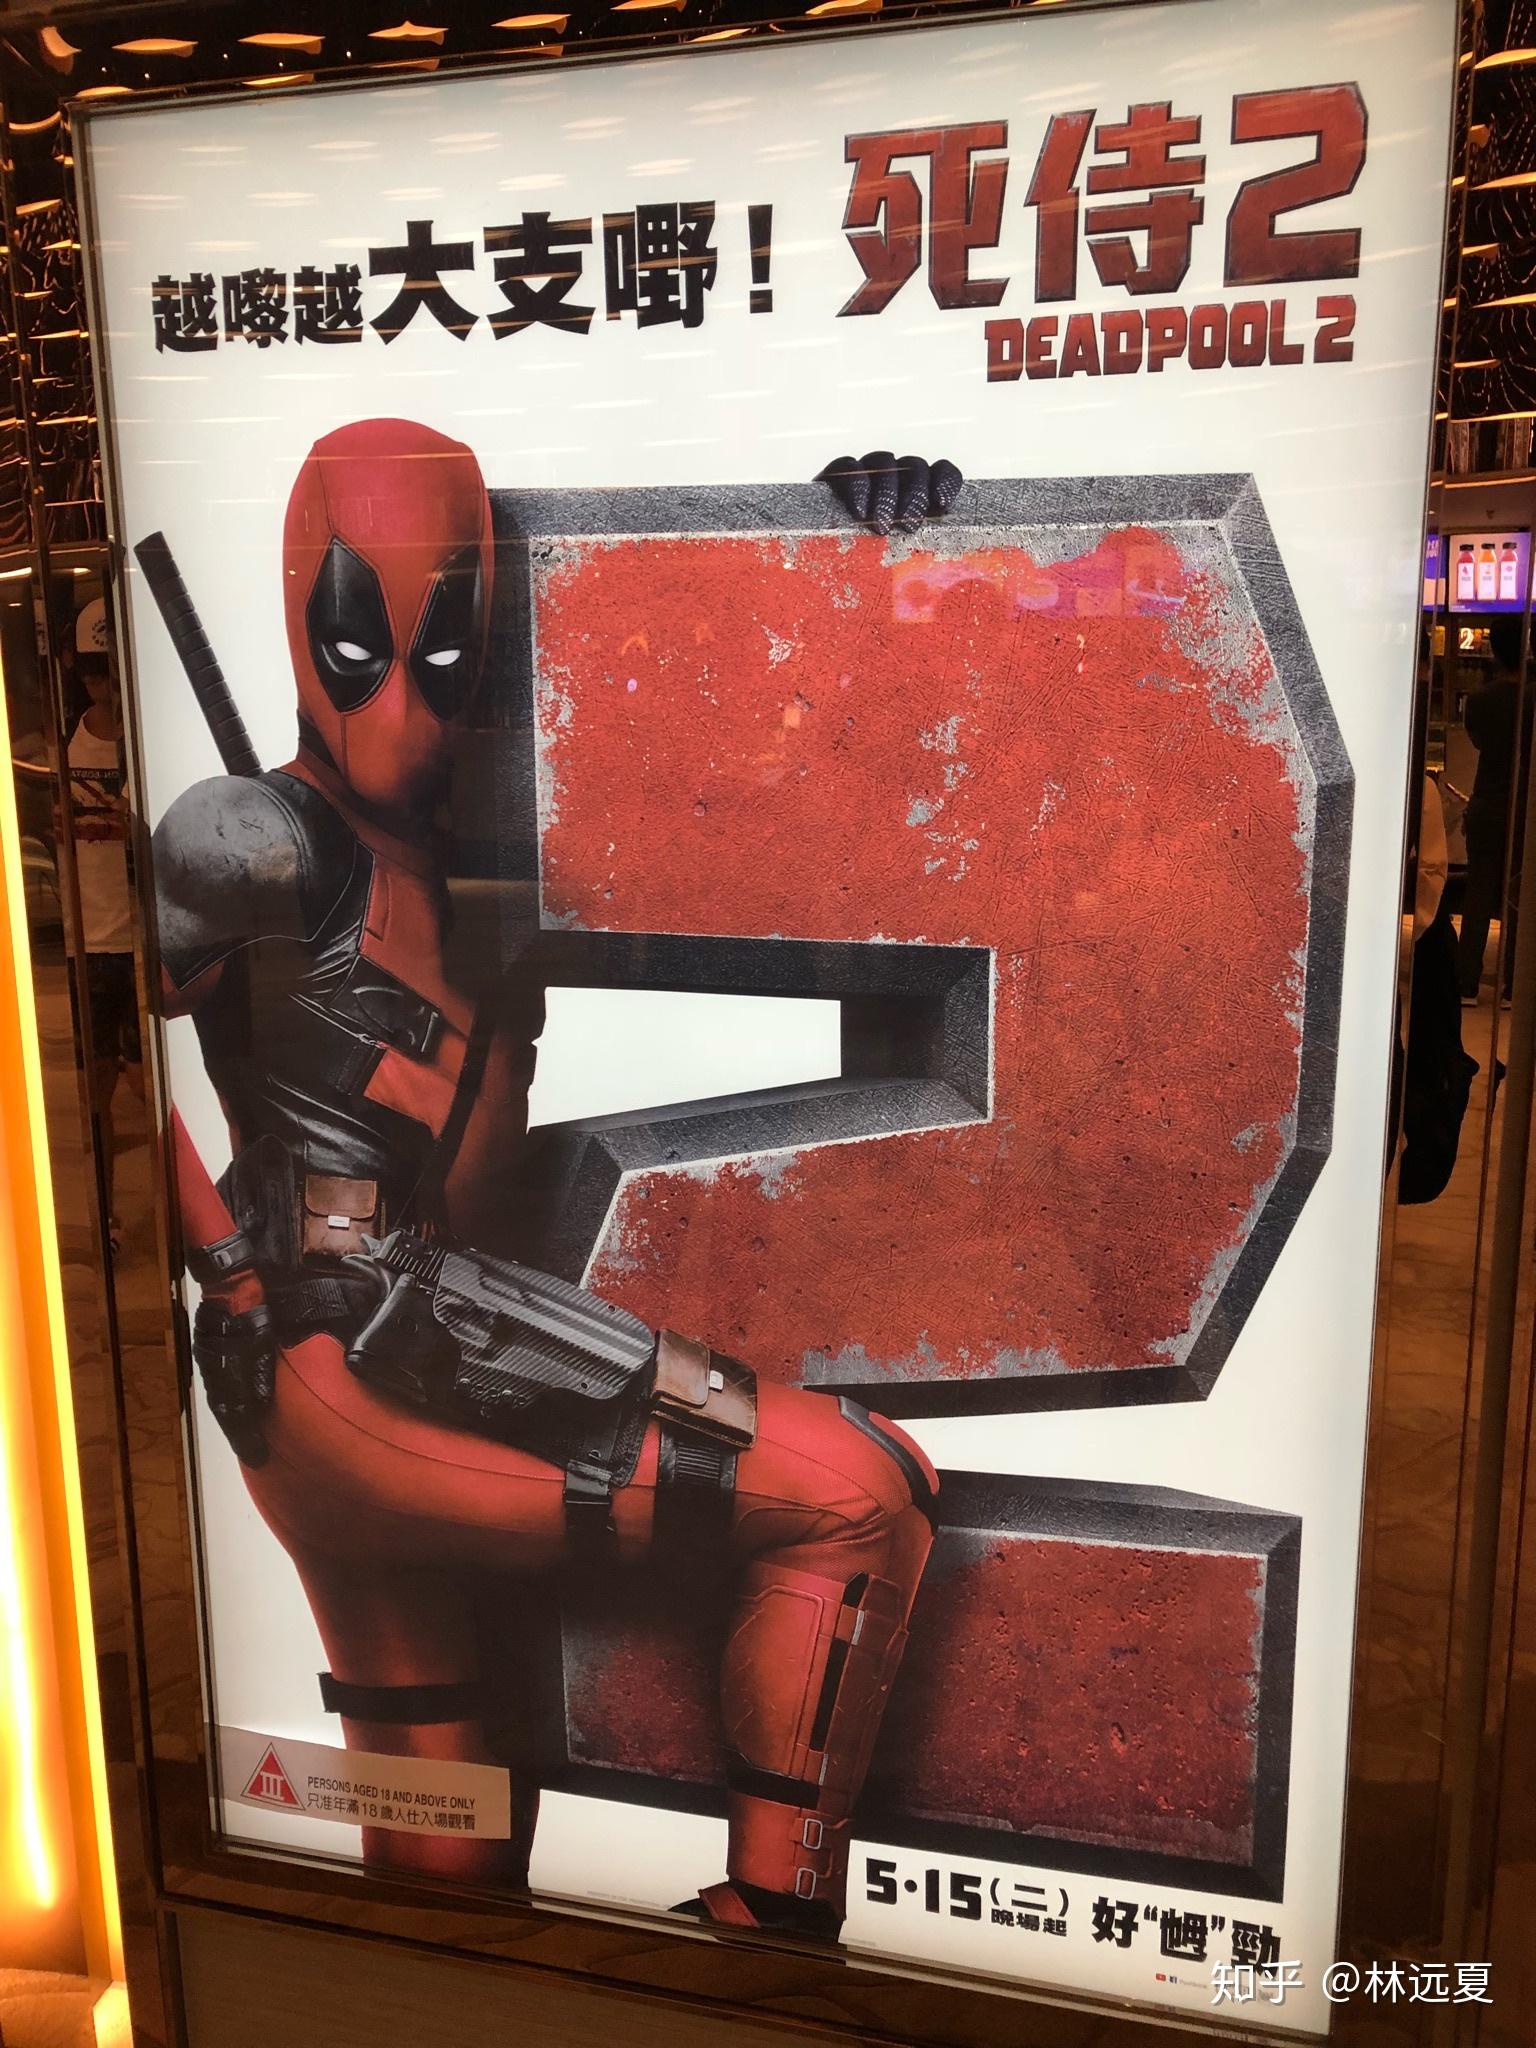 How to evaluate the movie ＂Deadpool 2＂ (North American Restriction)？